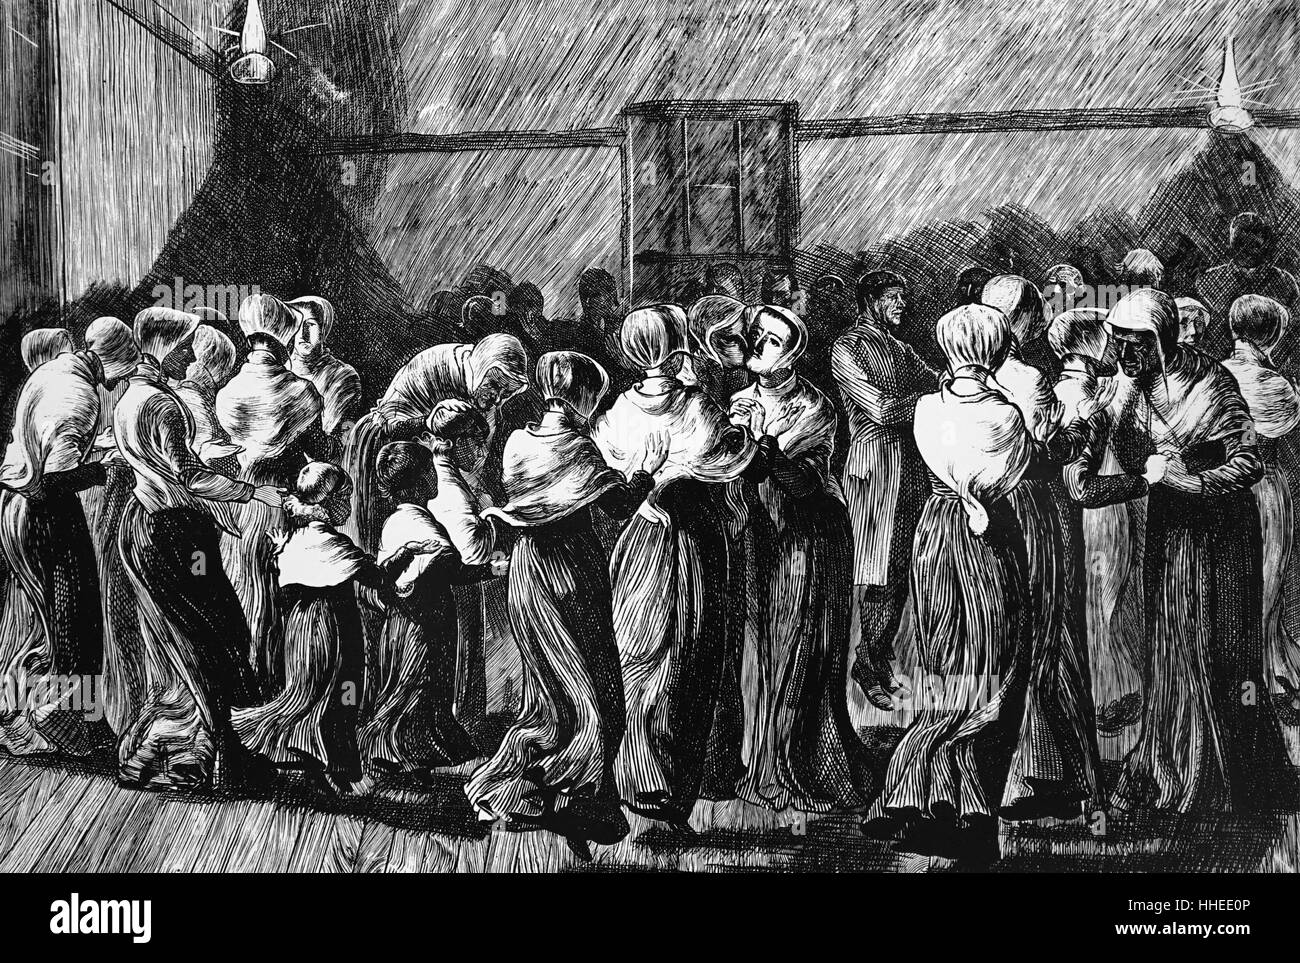 Engraving depicting Shakers dancing at Meeting, holding hands palms upwards to catch God's grace and blessing. Dated 19th Century Stock Photo